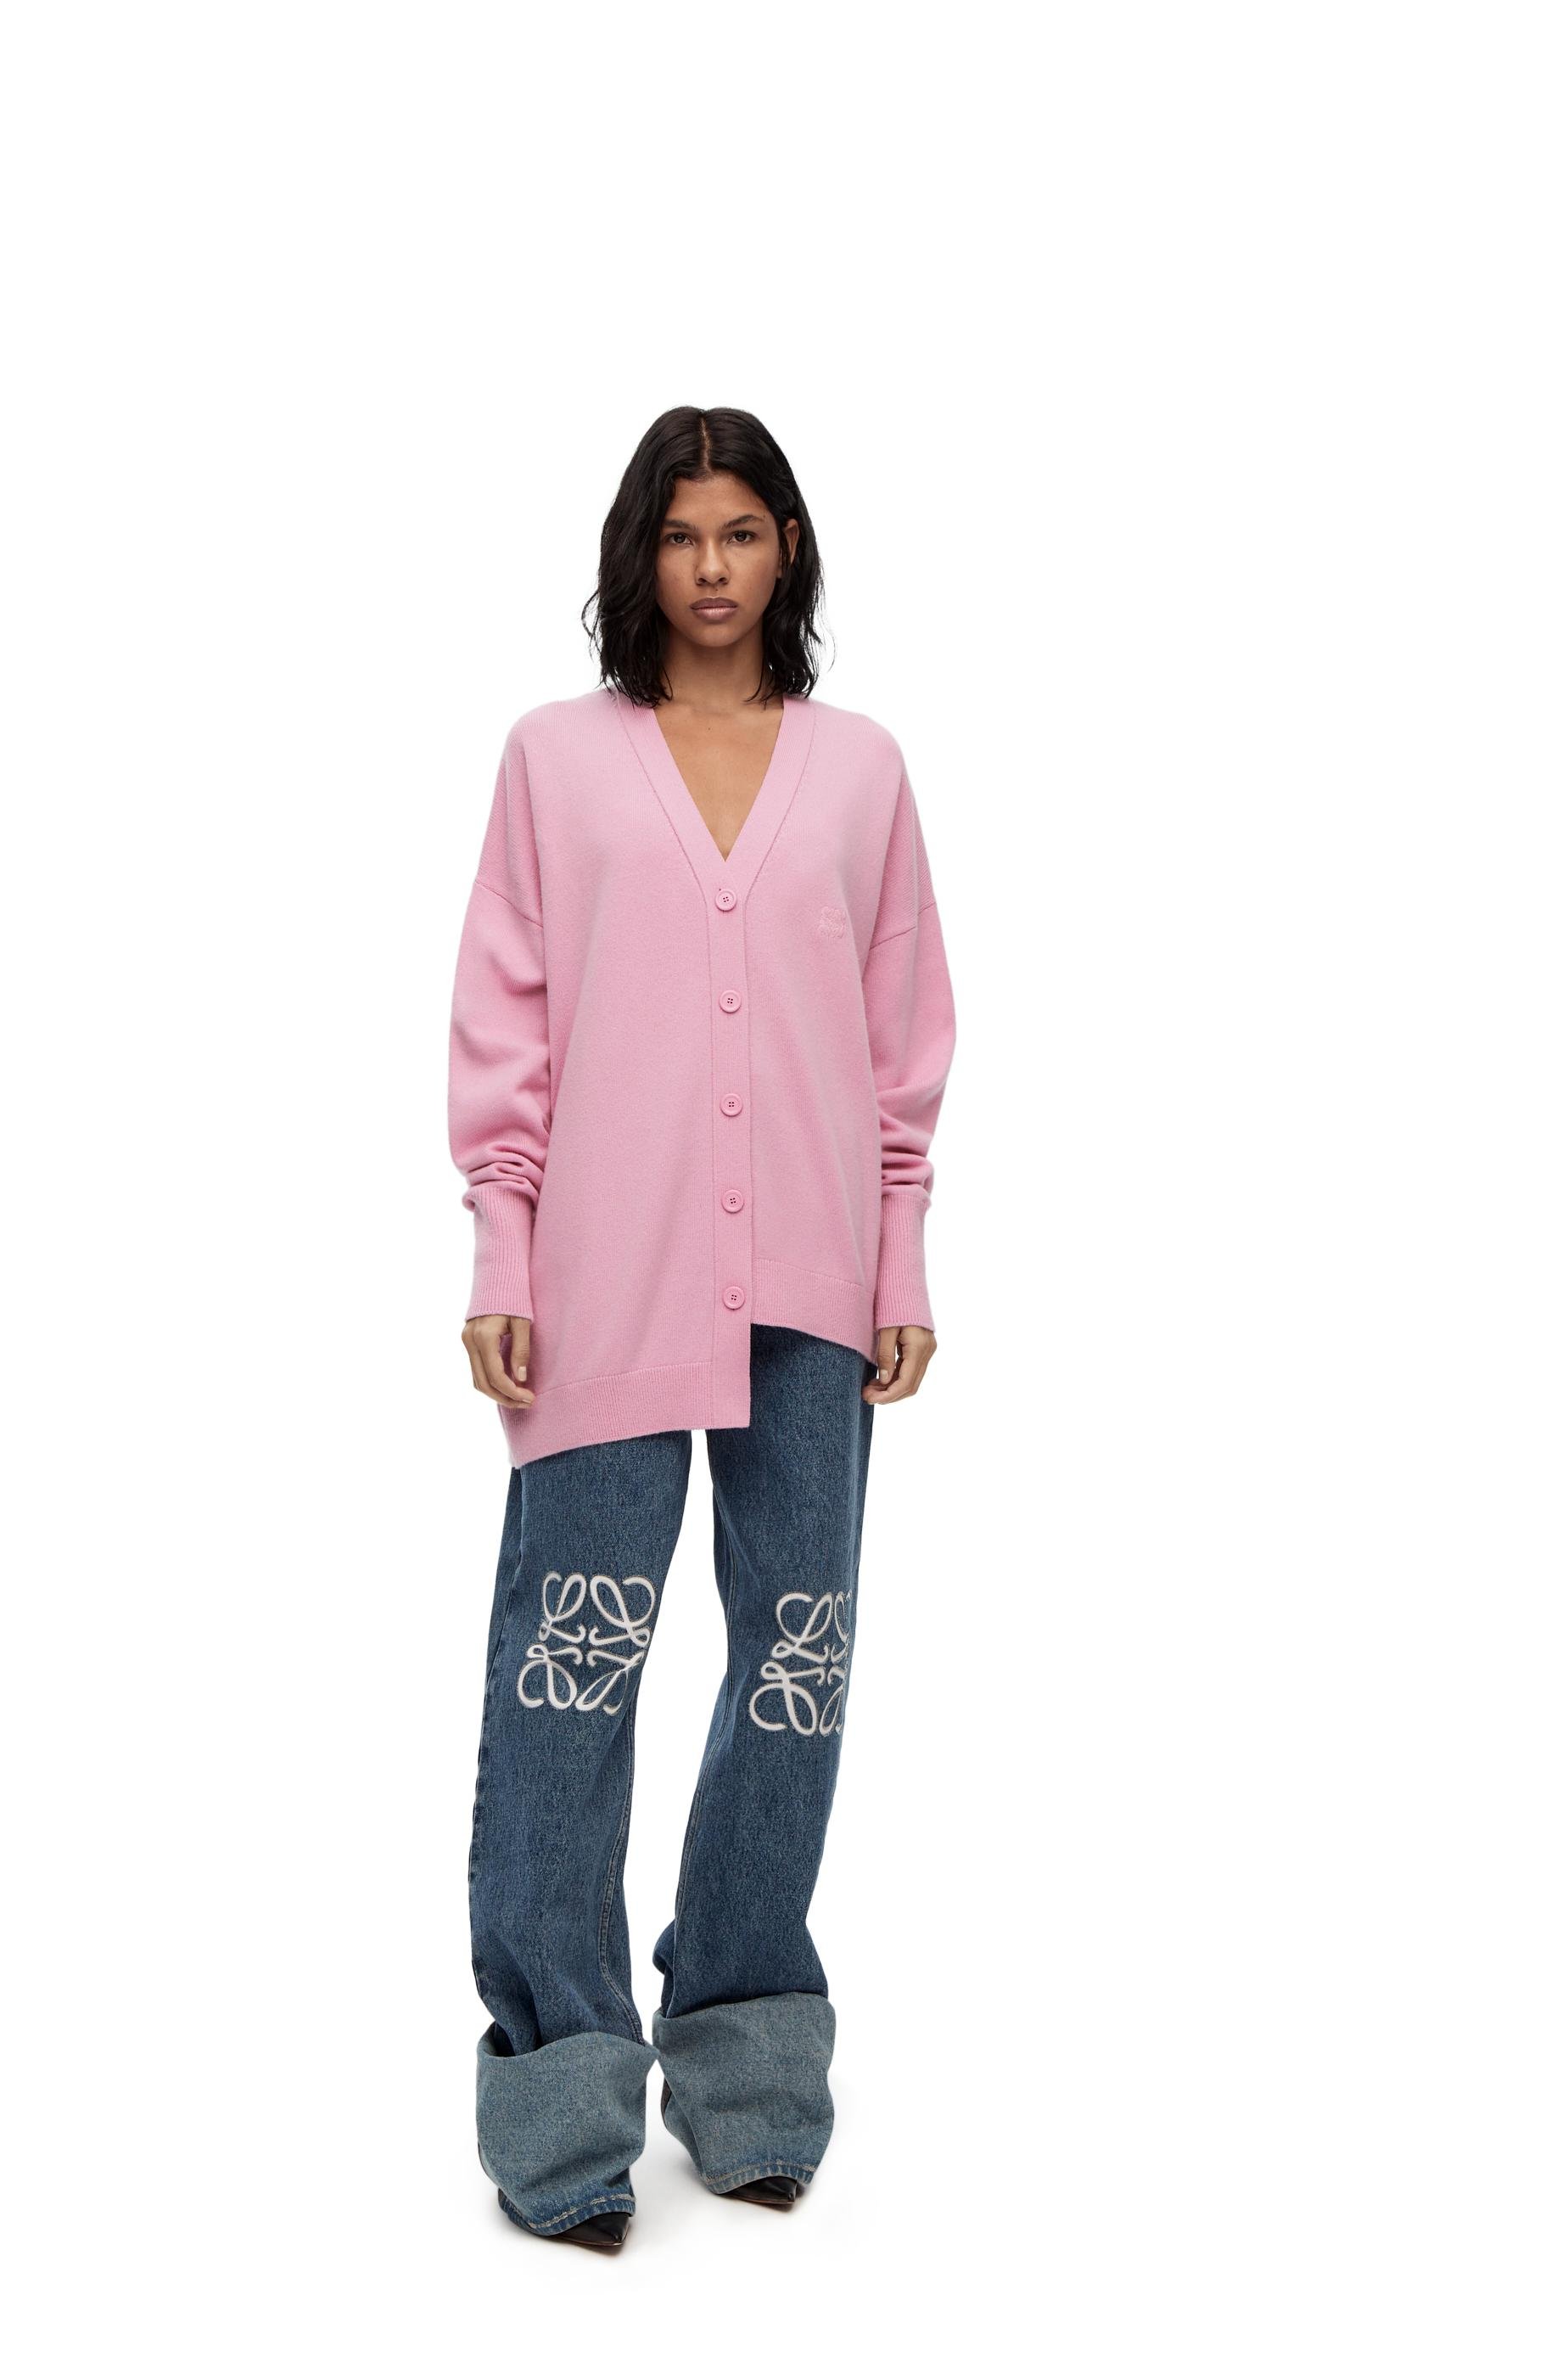 Asymmetric cardigan in cashmere by LOEWE